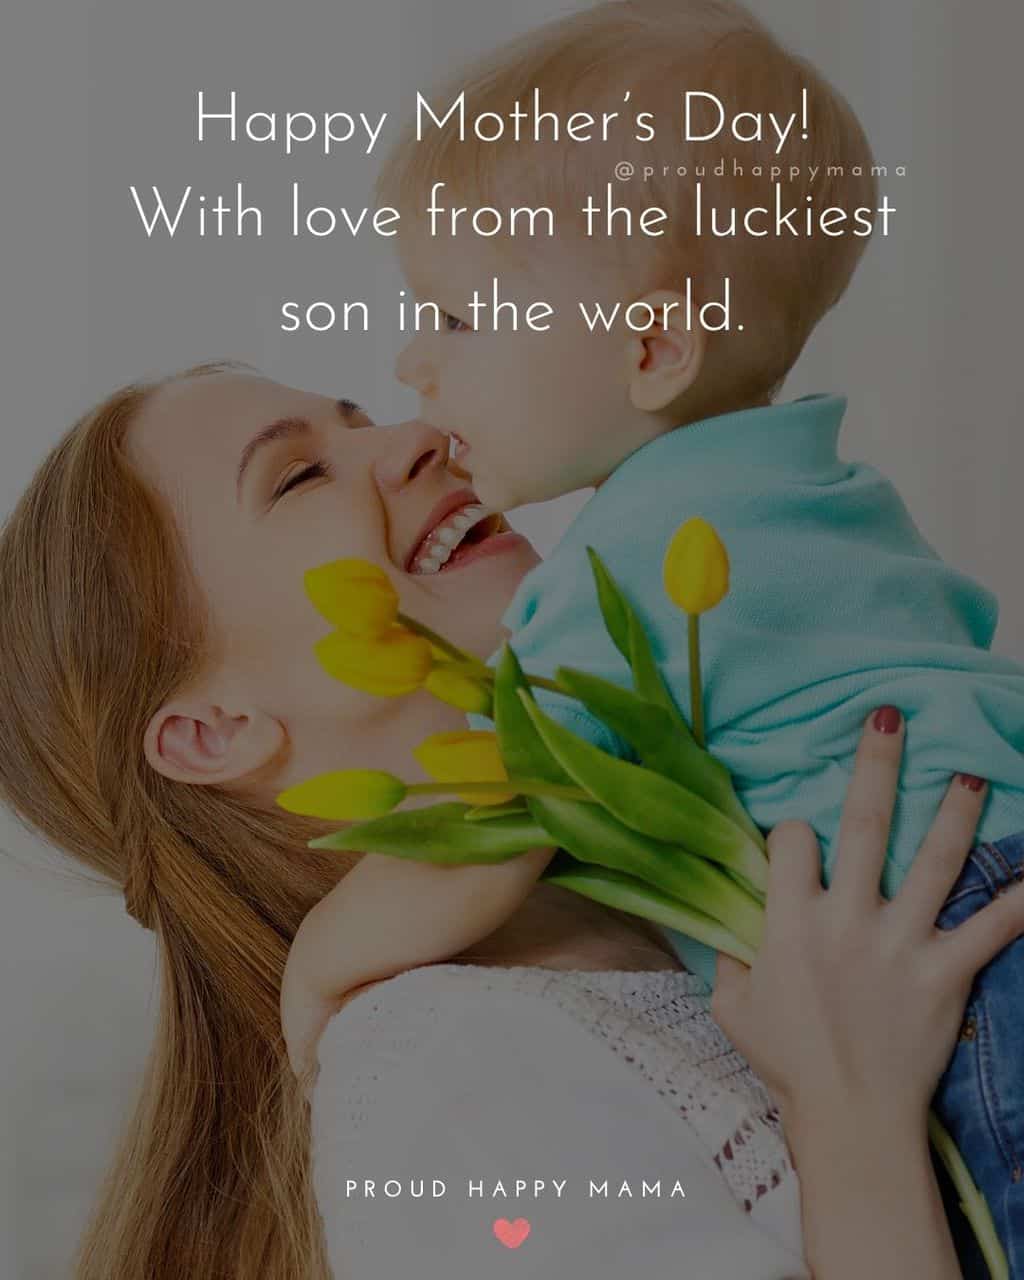 Happy Mothers Day Quotes From Son - Happy Mother’s Day! With love from the luckiest son in the world.’